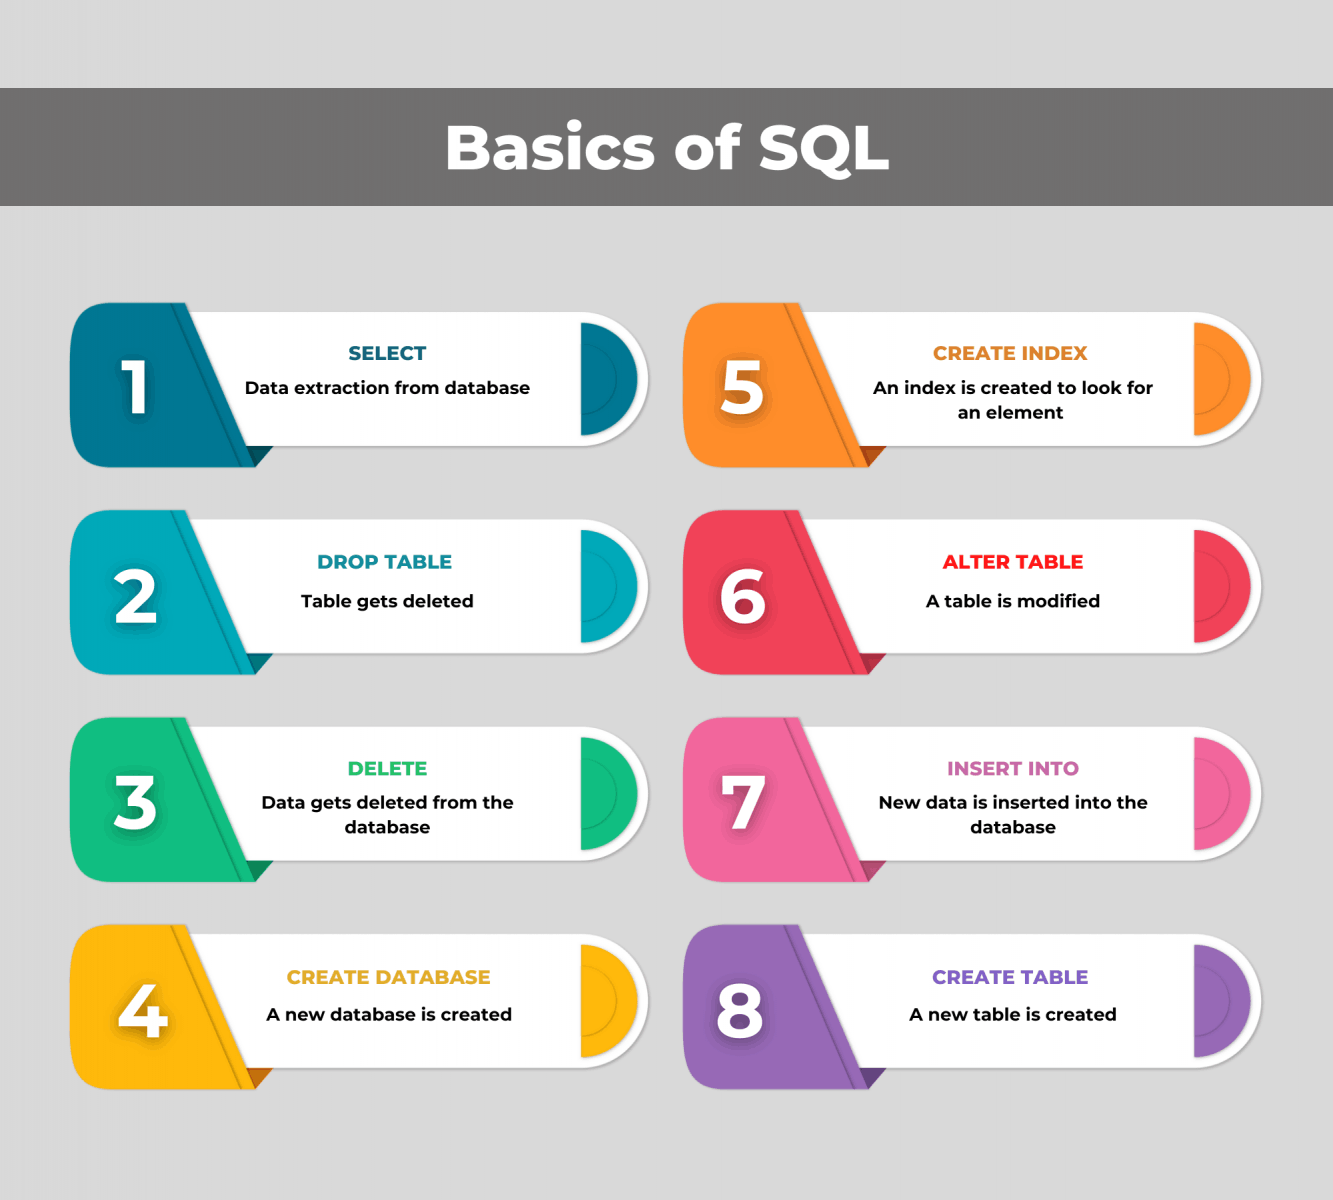 sql for data science peer review assignment